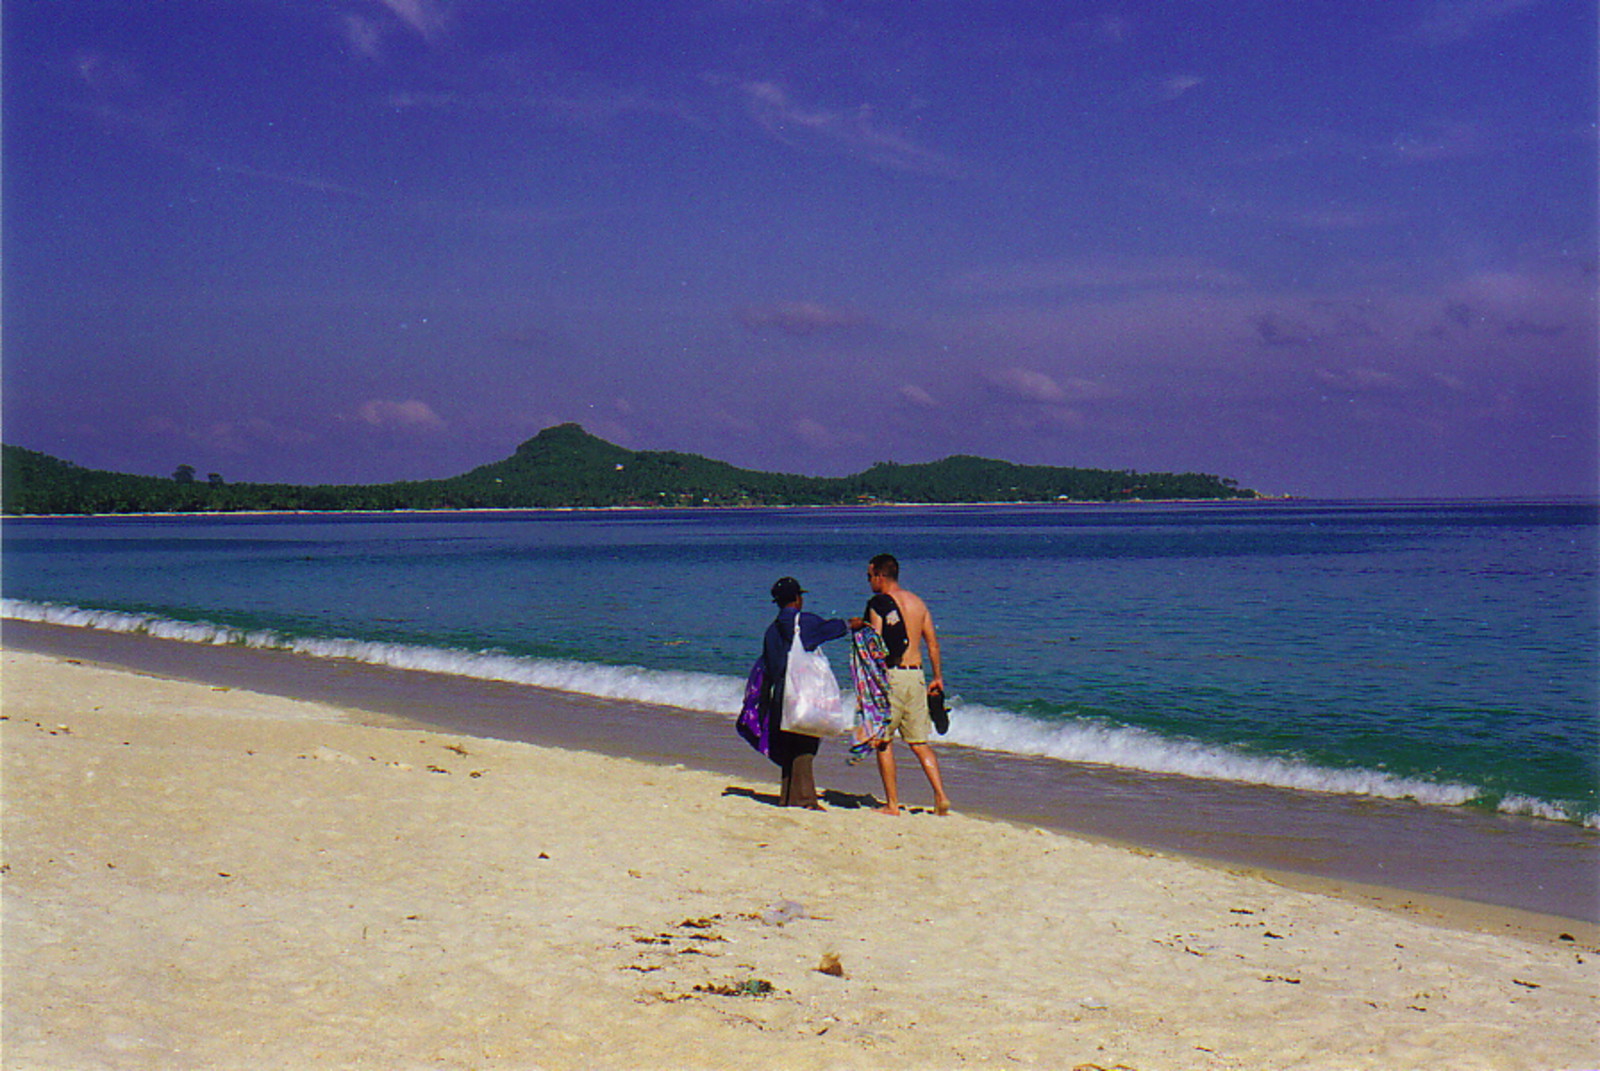 A tourist being approached by a salesman on Lamai Beach